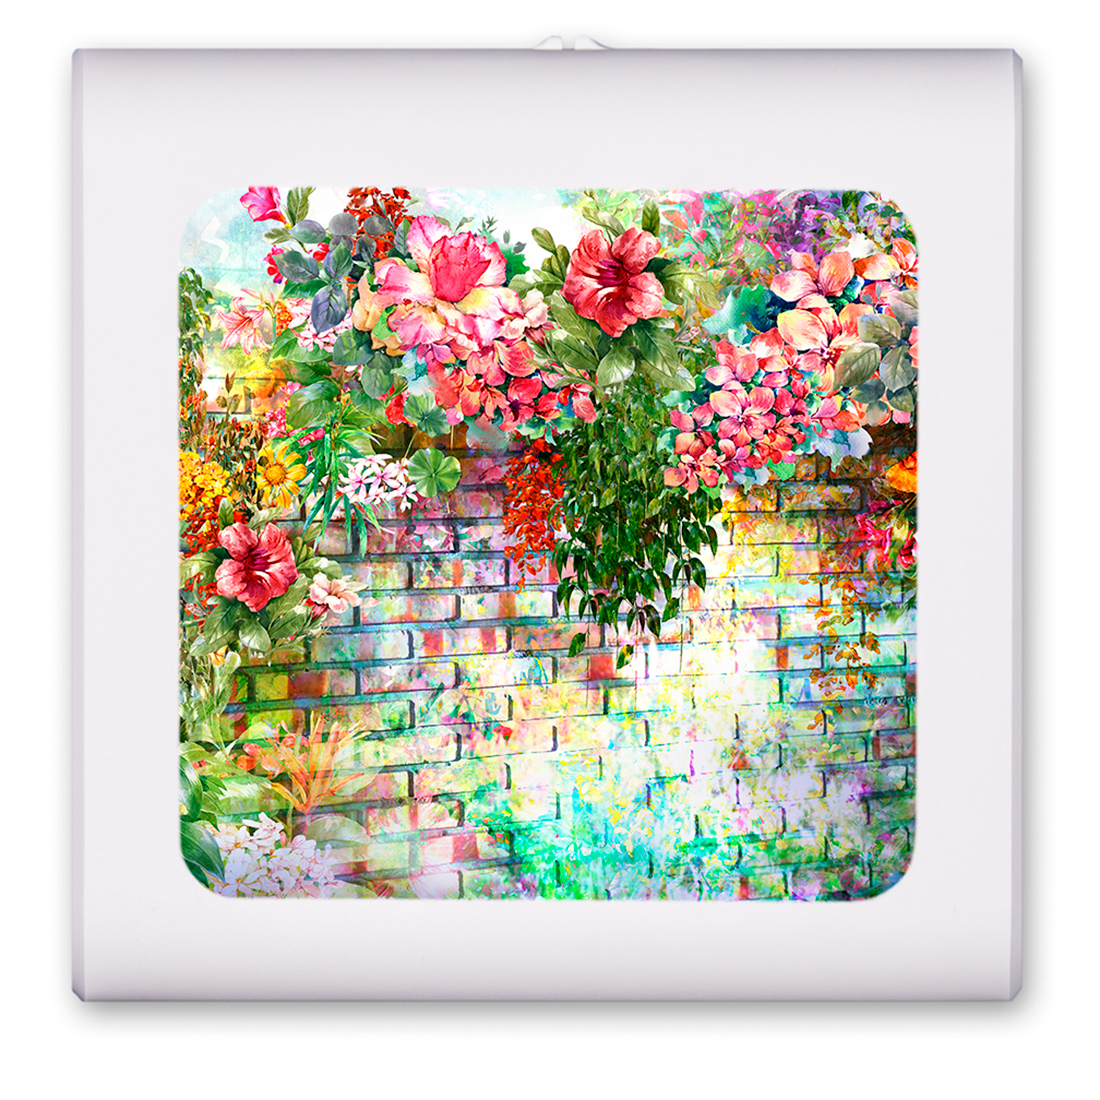 Floral Wall - #2596